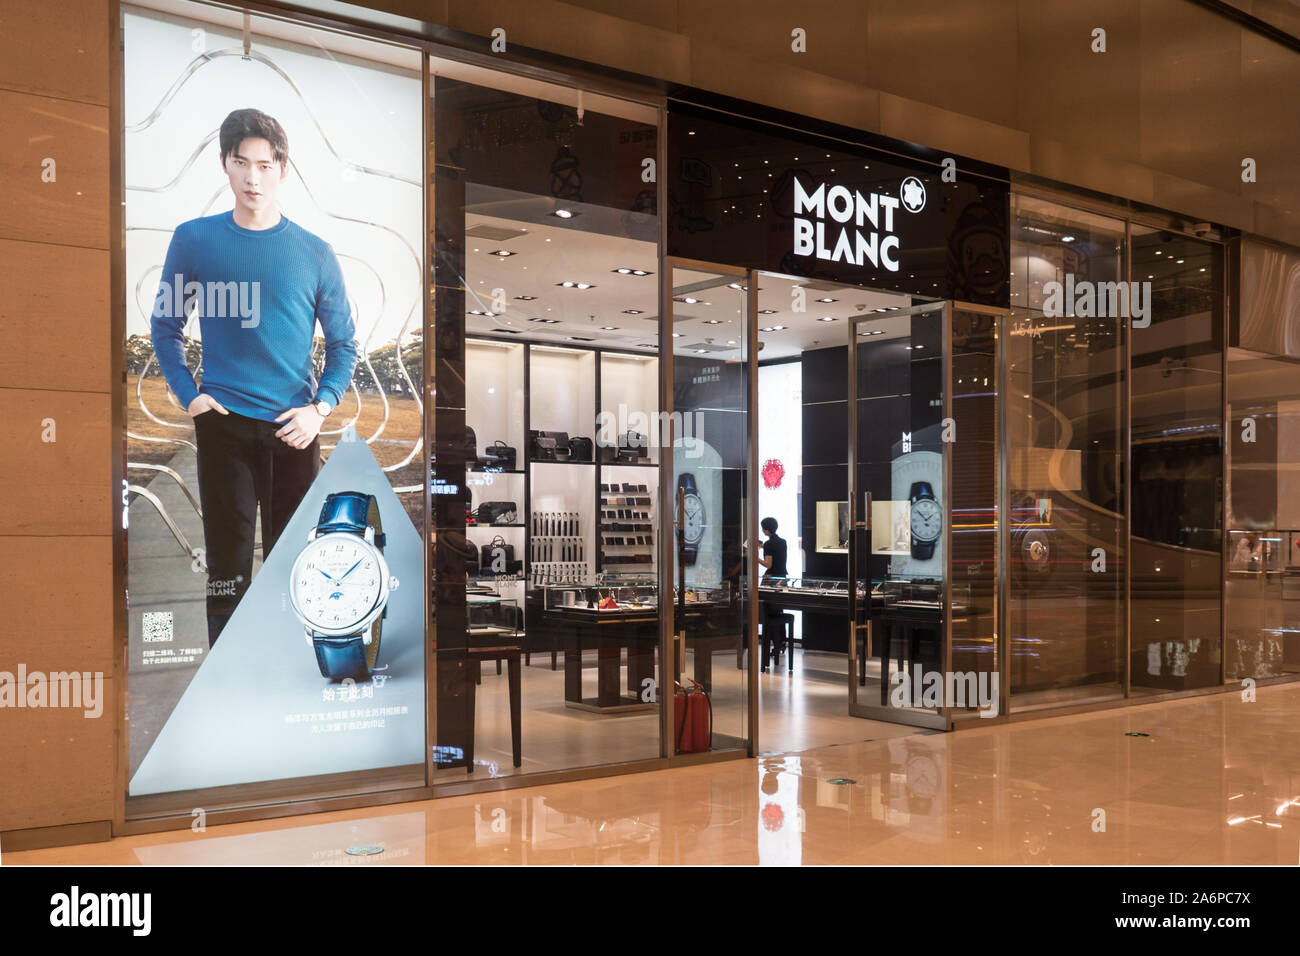 MONT BLANC in China: Shop facade during a special sale, This brand